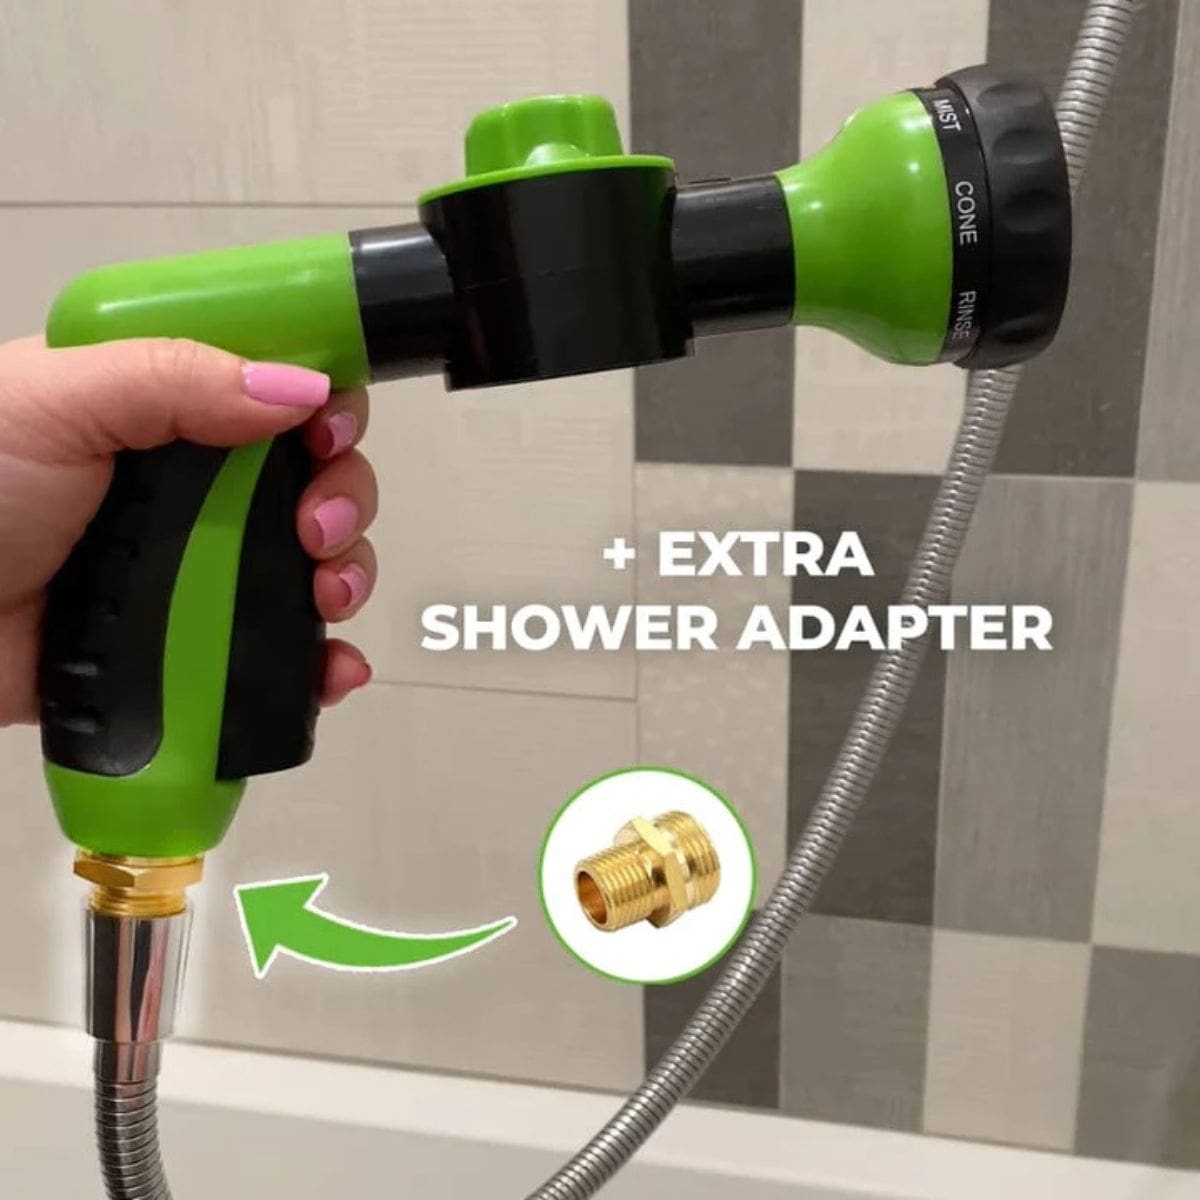 Doggo jet comes with extra shower adapter 